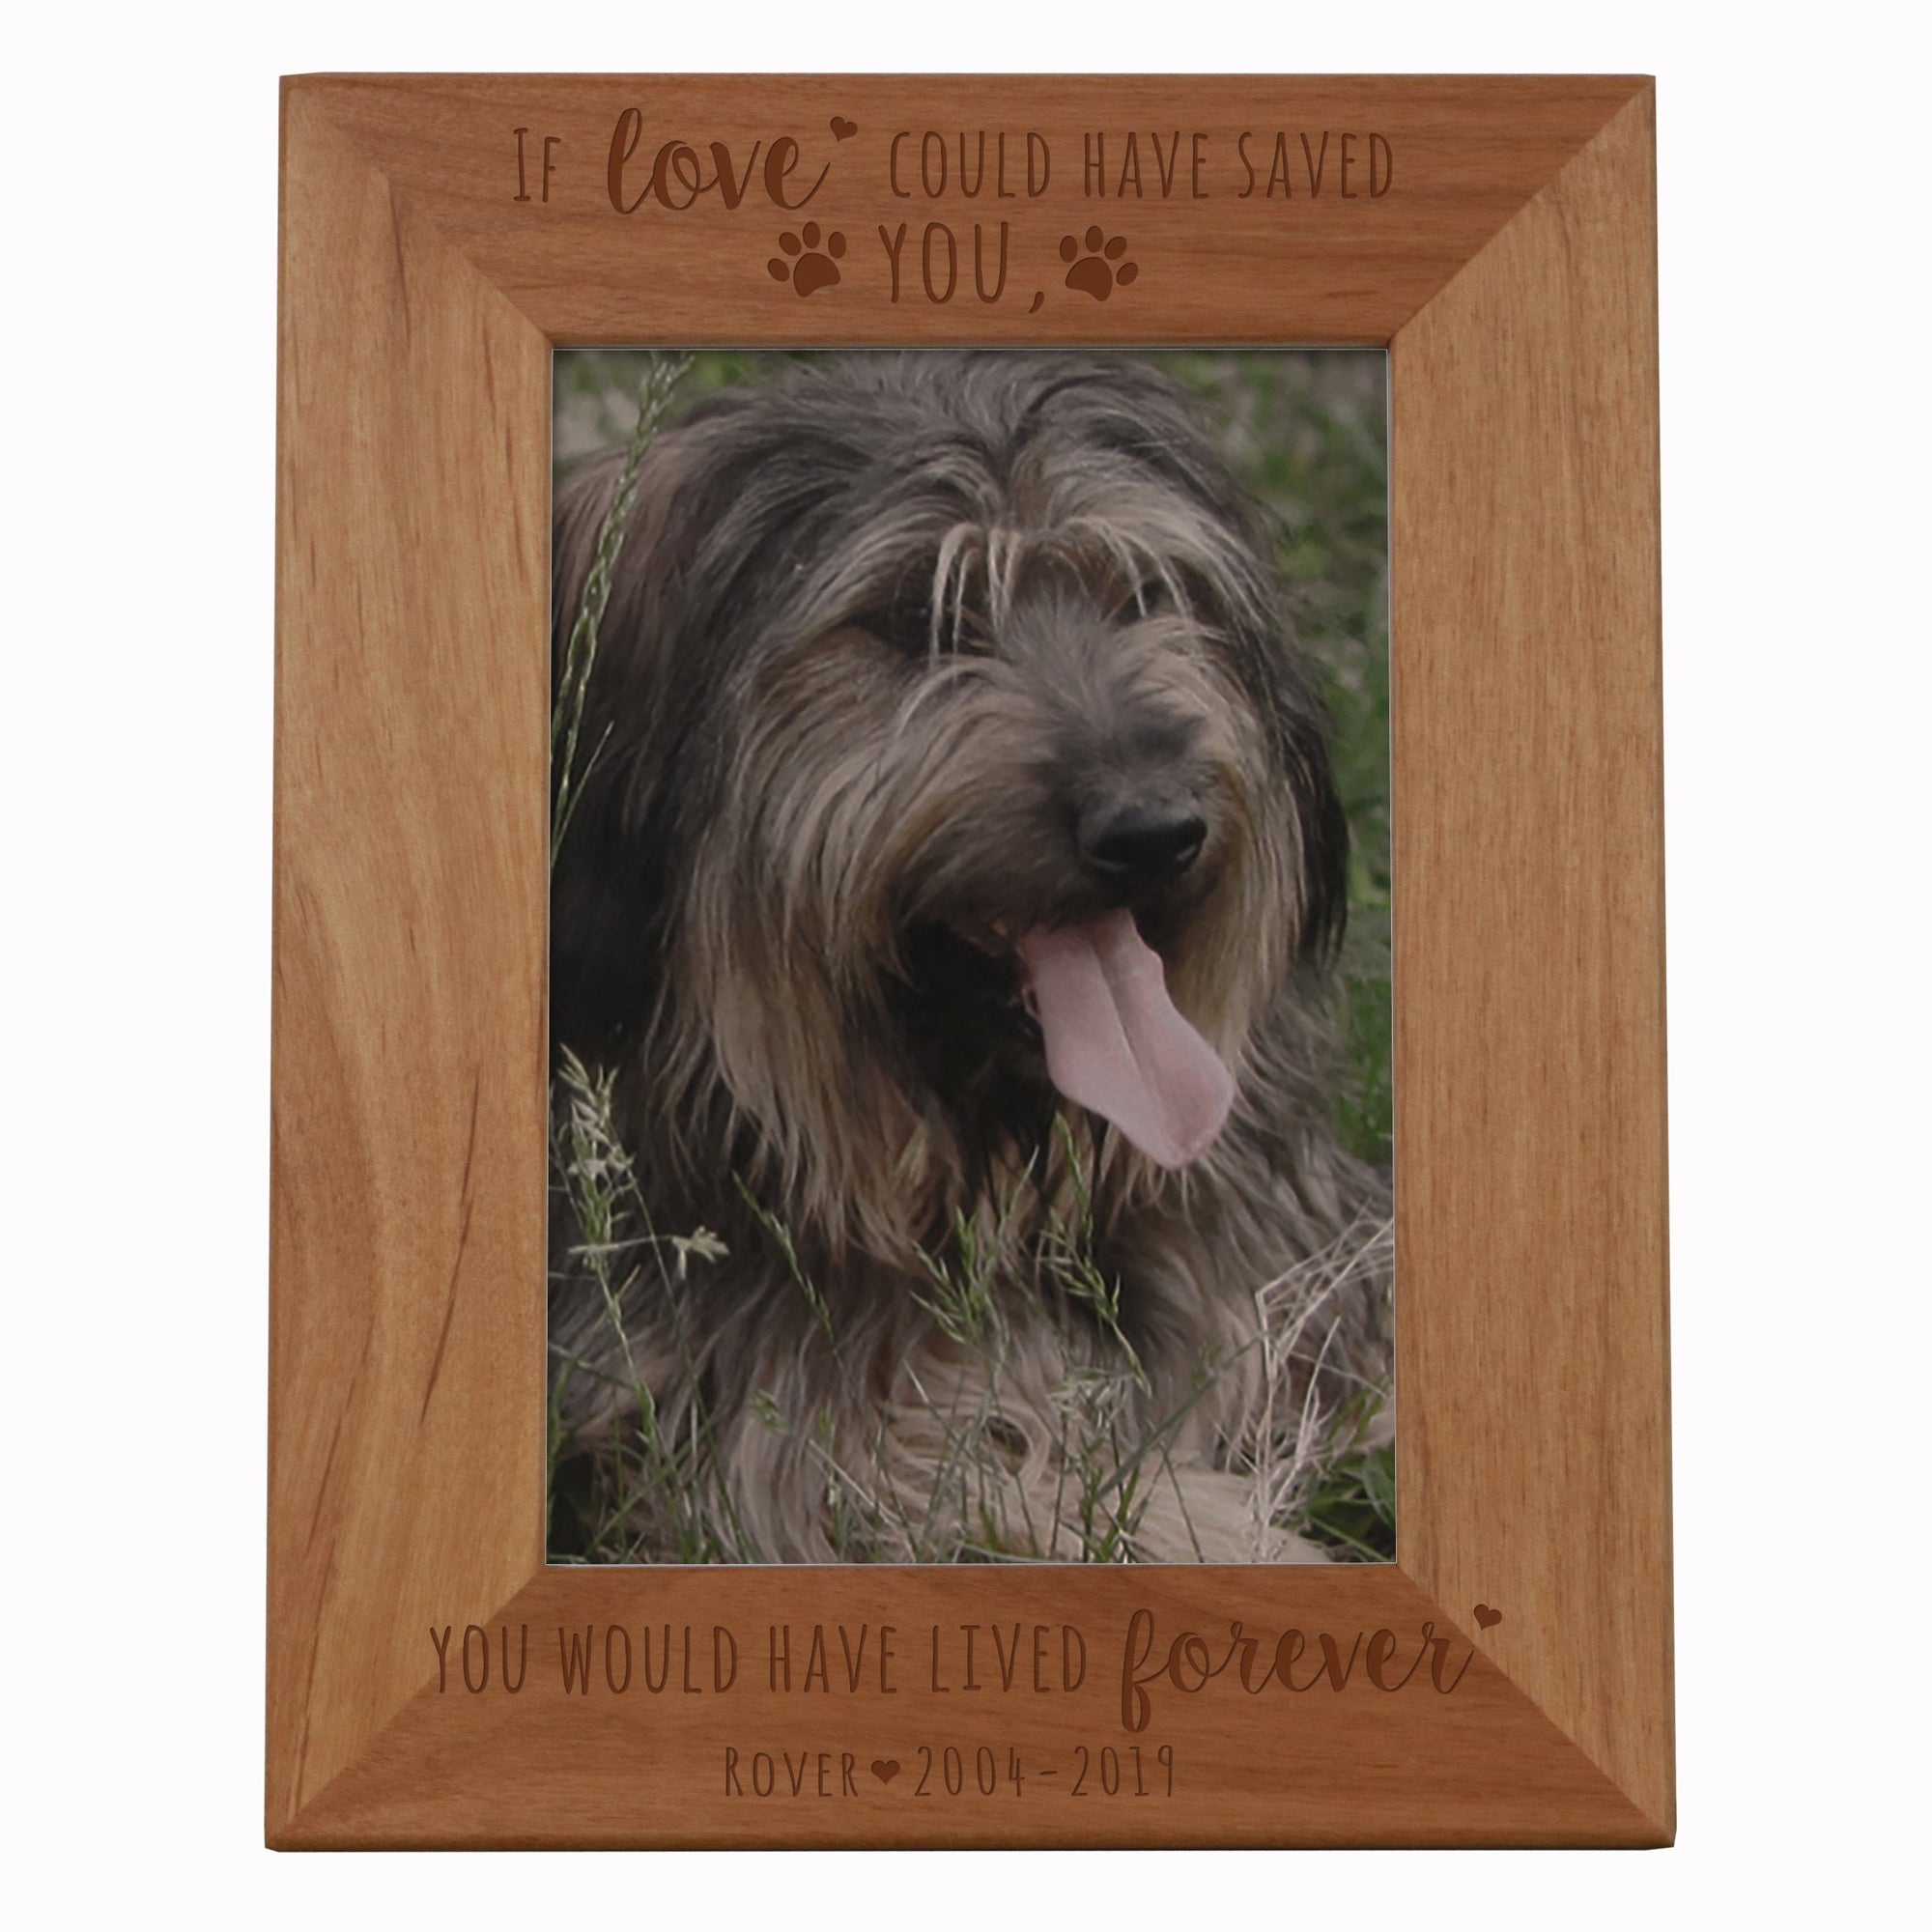 Pet Memorial Picture Frame - If Love Could Have Saved You